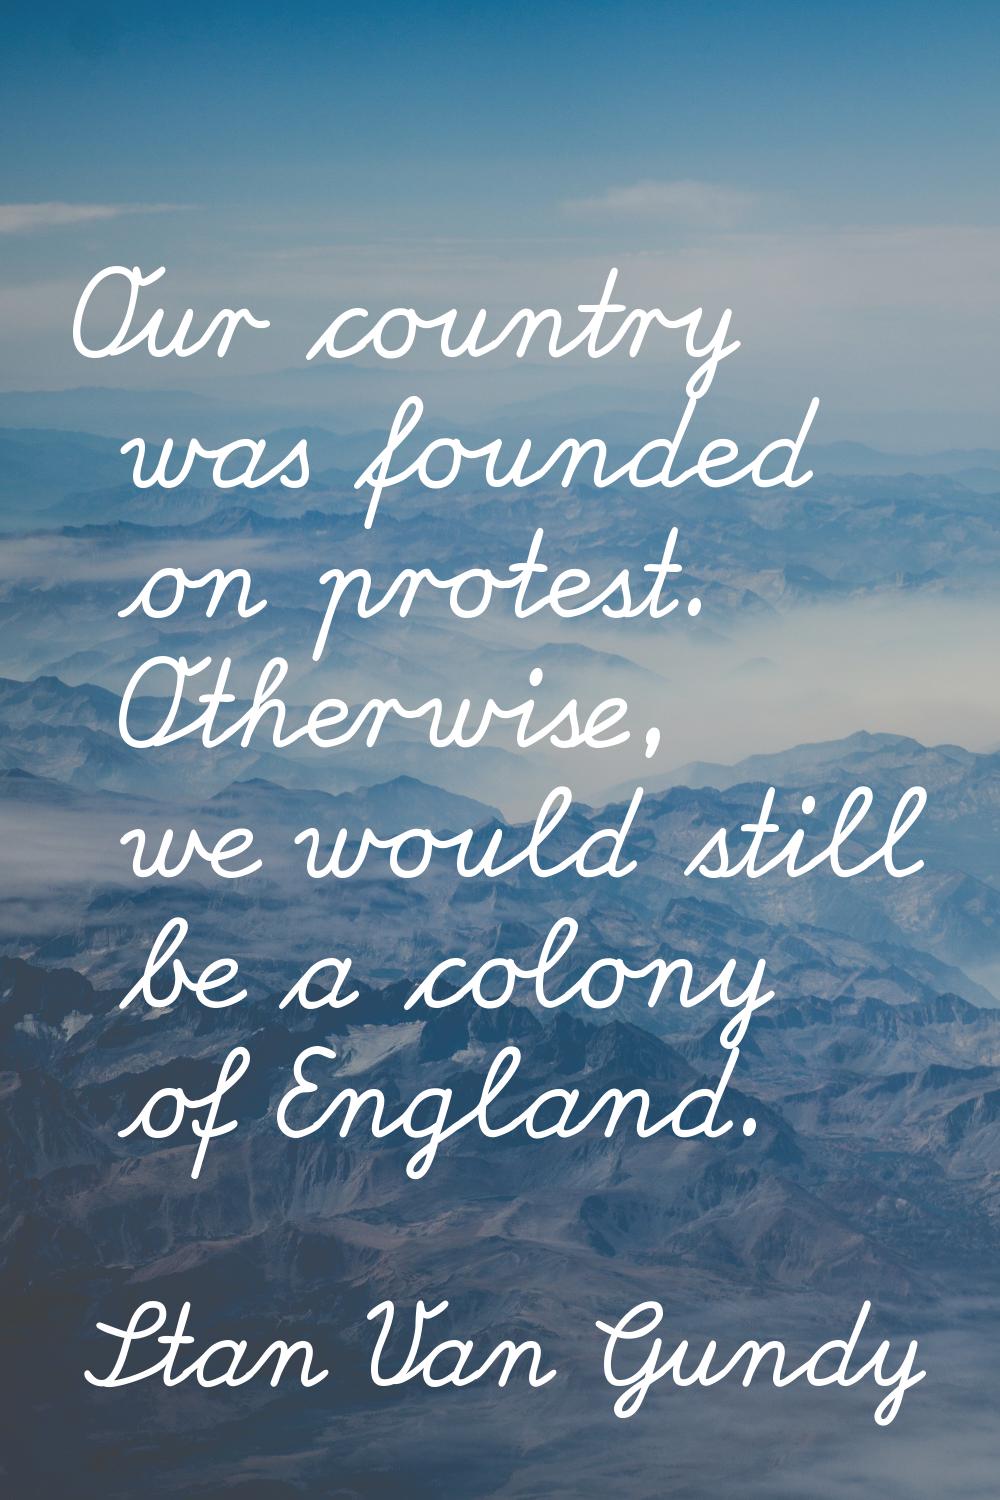 Our country was founded on protest. Otherwise, we would still be a colony of England.